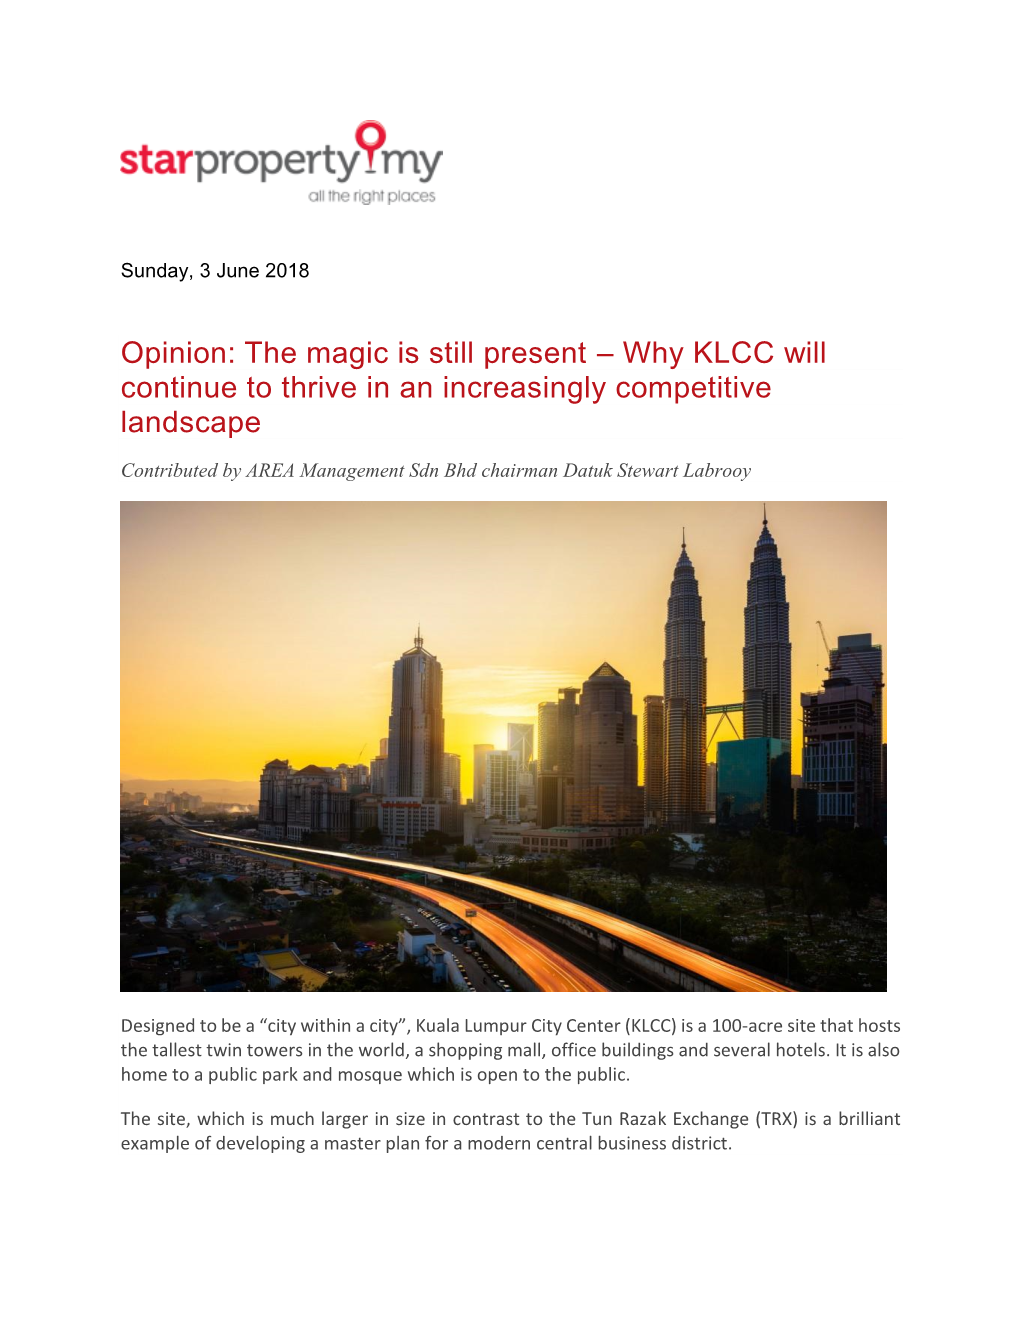 The Magic Is Still Present – Why KLCC Will Continue to Thrive in an Increasingly Competitive Landscape